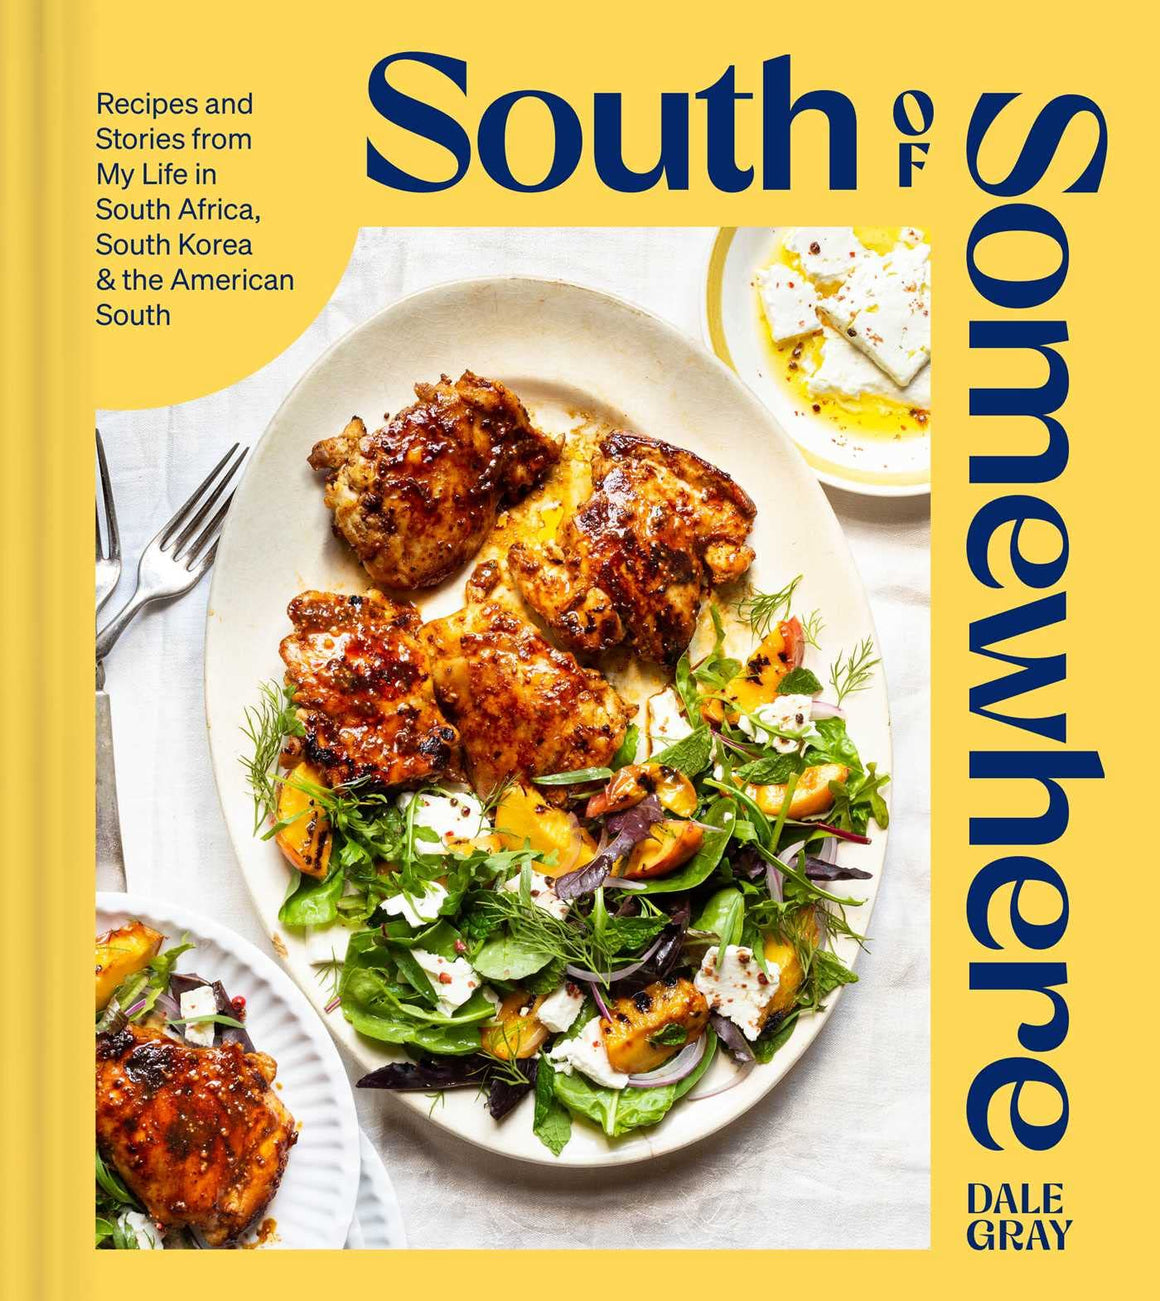 (*NEW ARRIVAL*) Dale Gray. South of Somewhere: Recipes and Stories from My Life in South Africa, South Korea & the American South